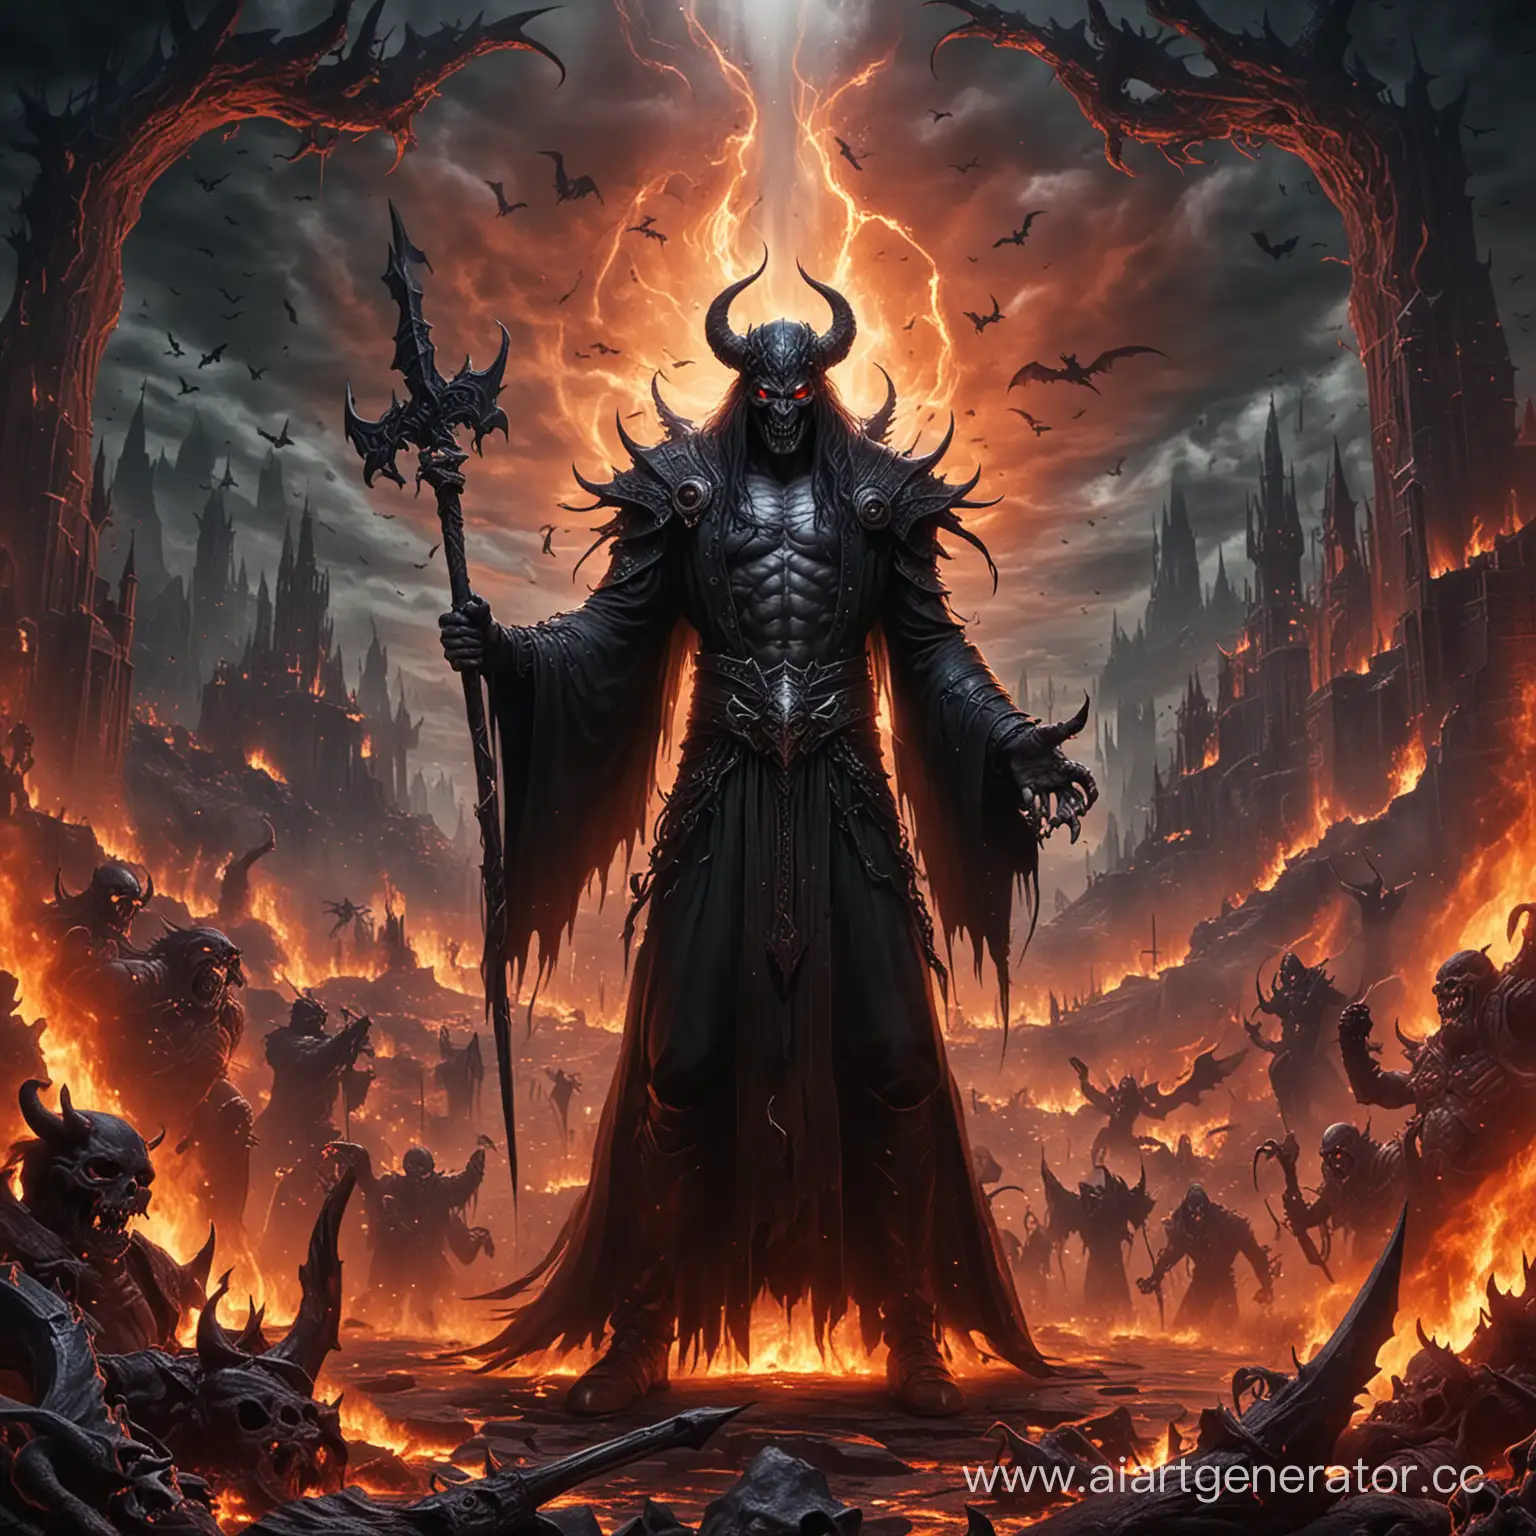 Fiery-Descent-into-Hell-Explore-the-Depths-of-the-Netherworld